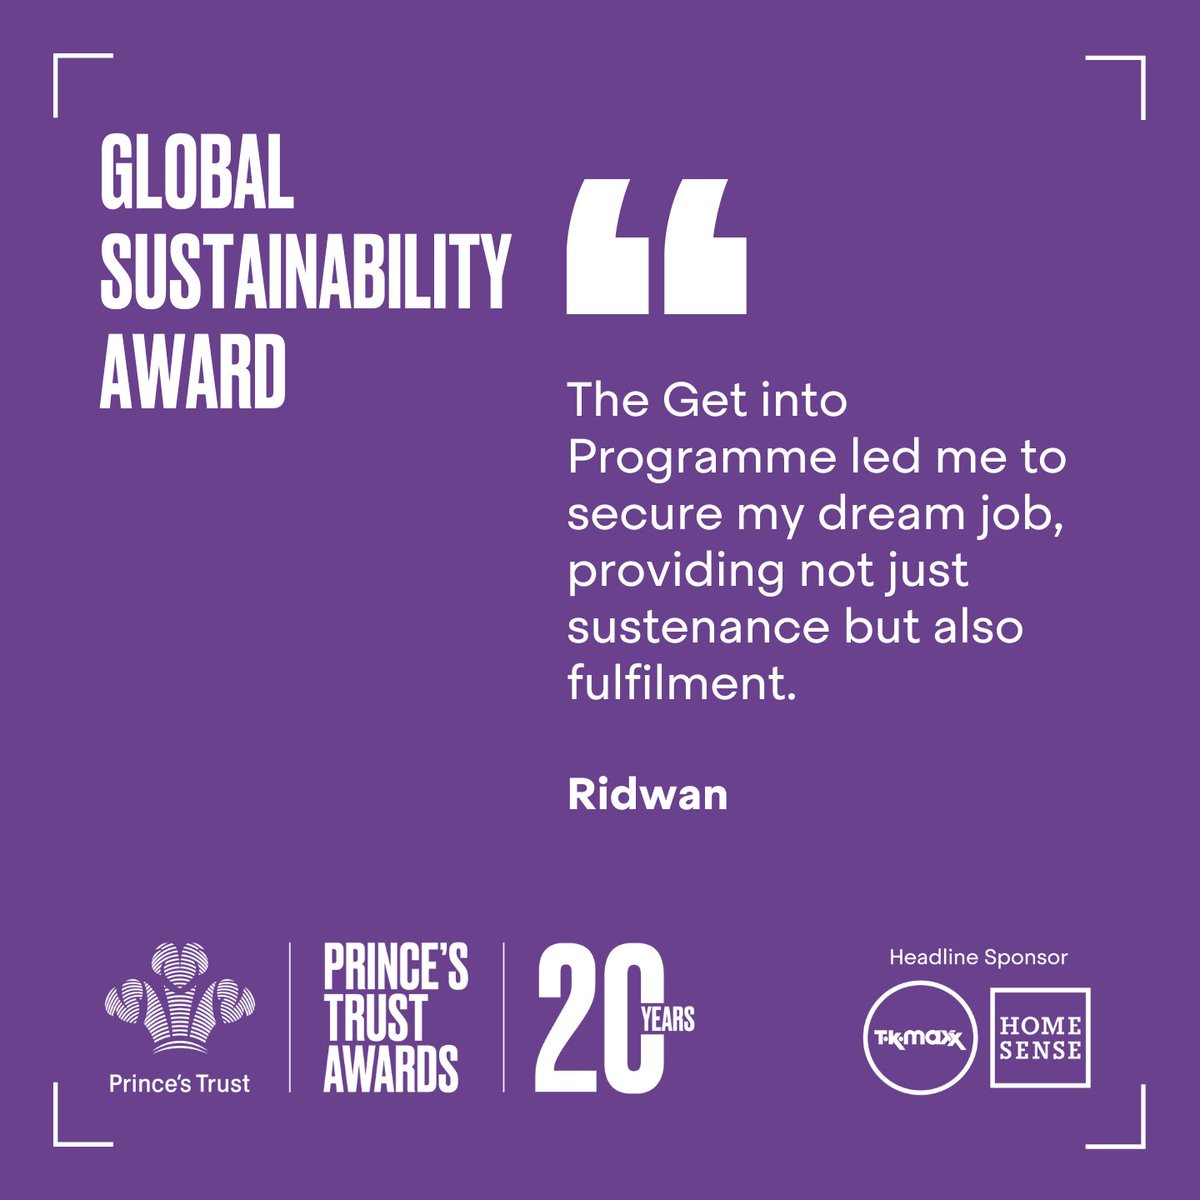 Ridwan is our Global Sustainability Award winner, sponsored by @OctopusEnergy! 🏆🎉 After graduating, Ridwan struggled to break into the green sector. But, with help from @KingsTrustInt, formerly Prince's Trust International, he turned his dream of a green career into a reality.